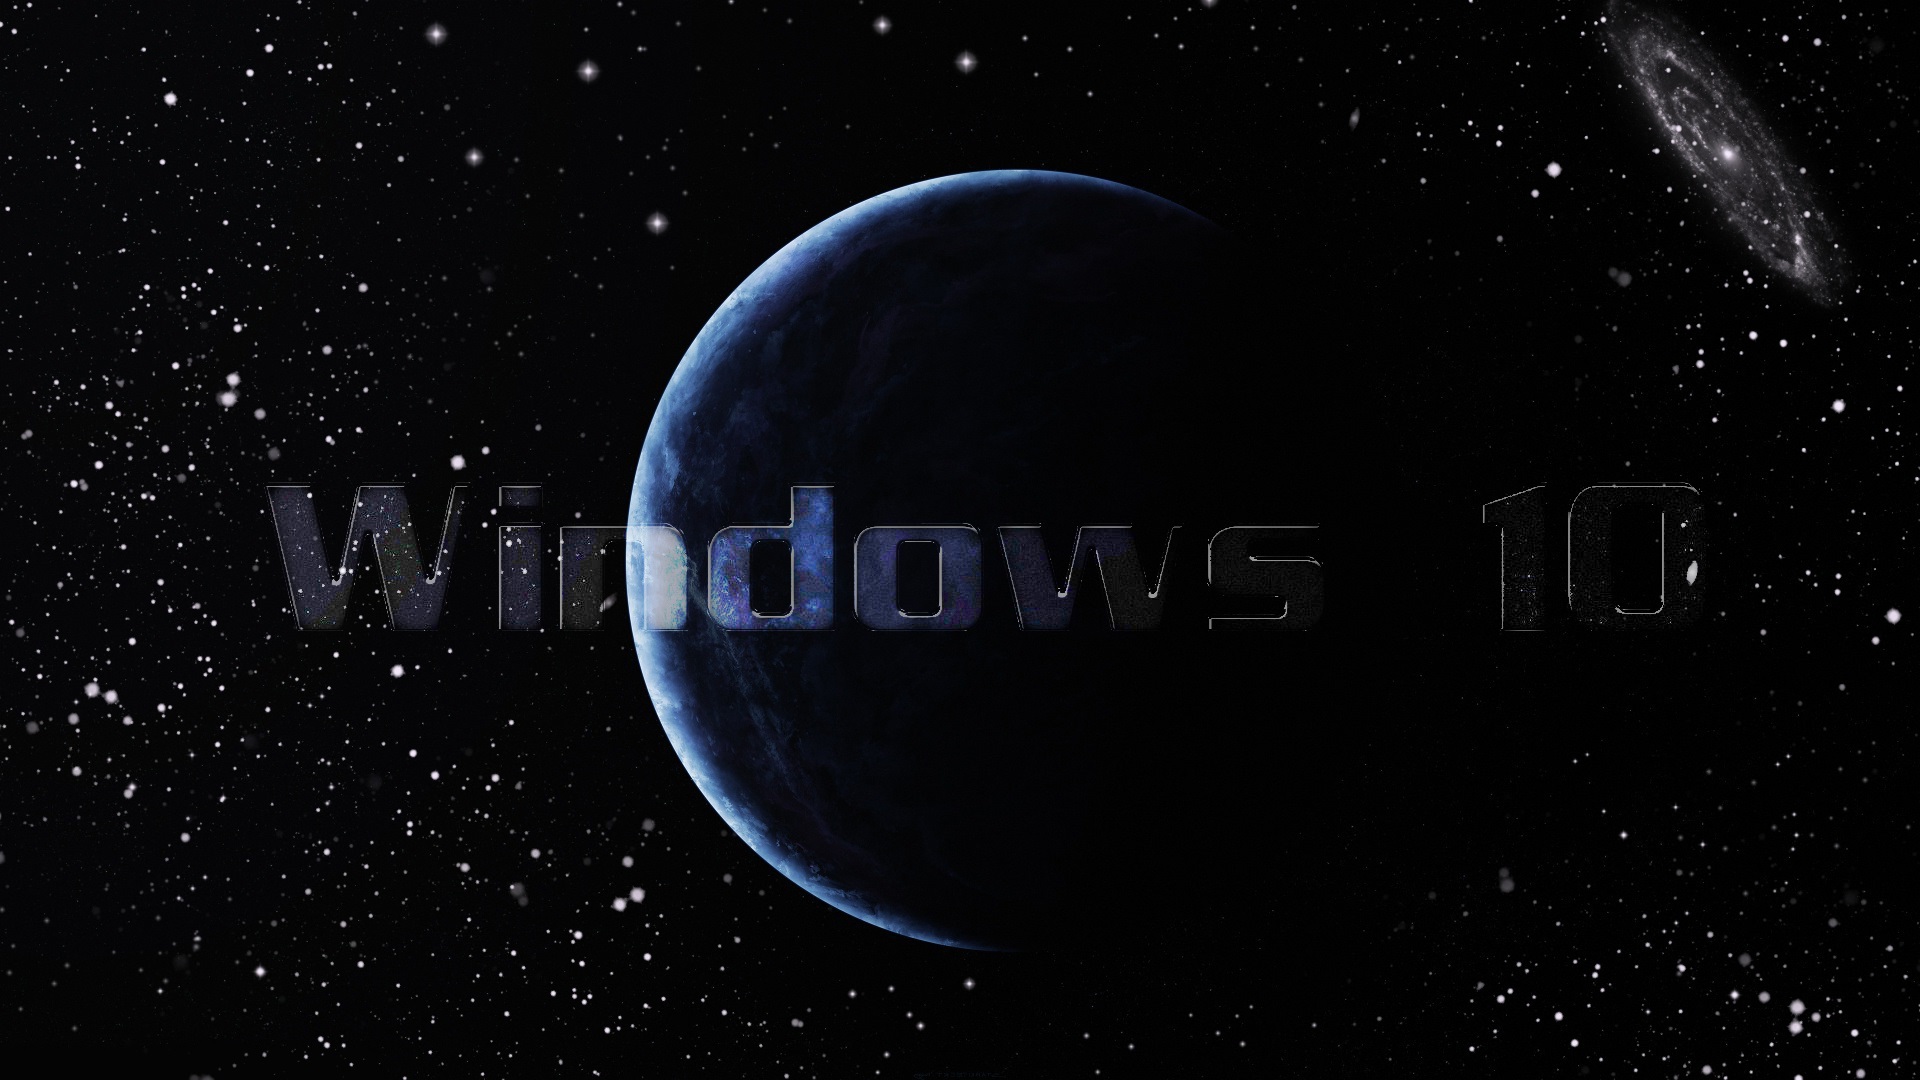 Universe Windows Wallpaper And Image Pictures